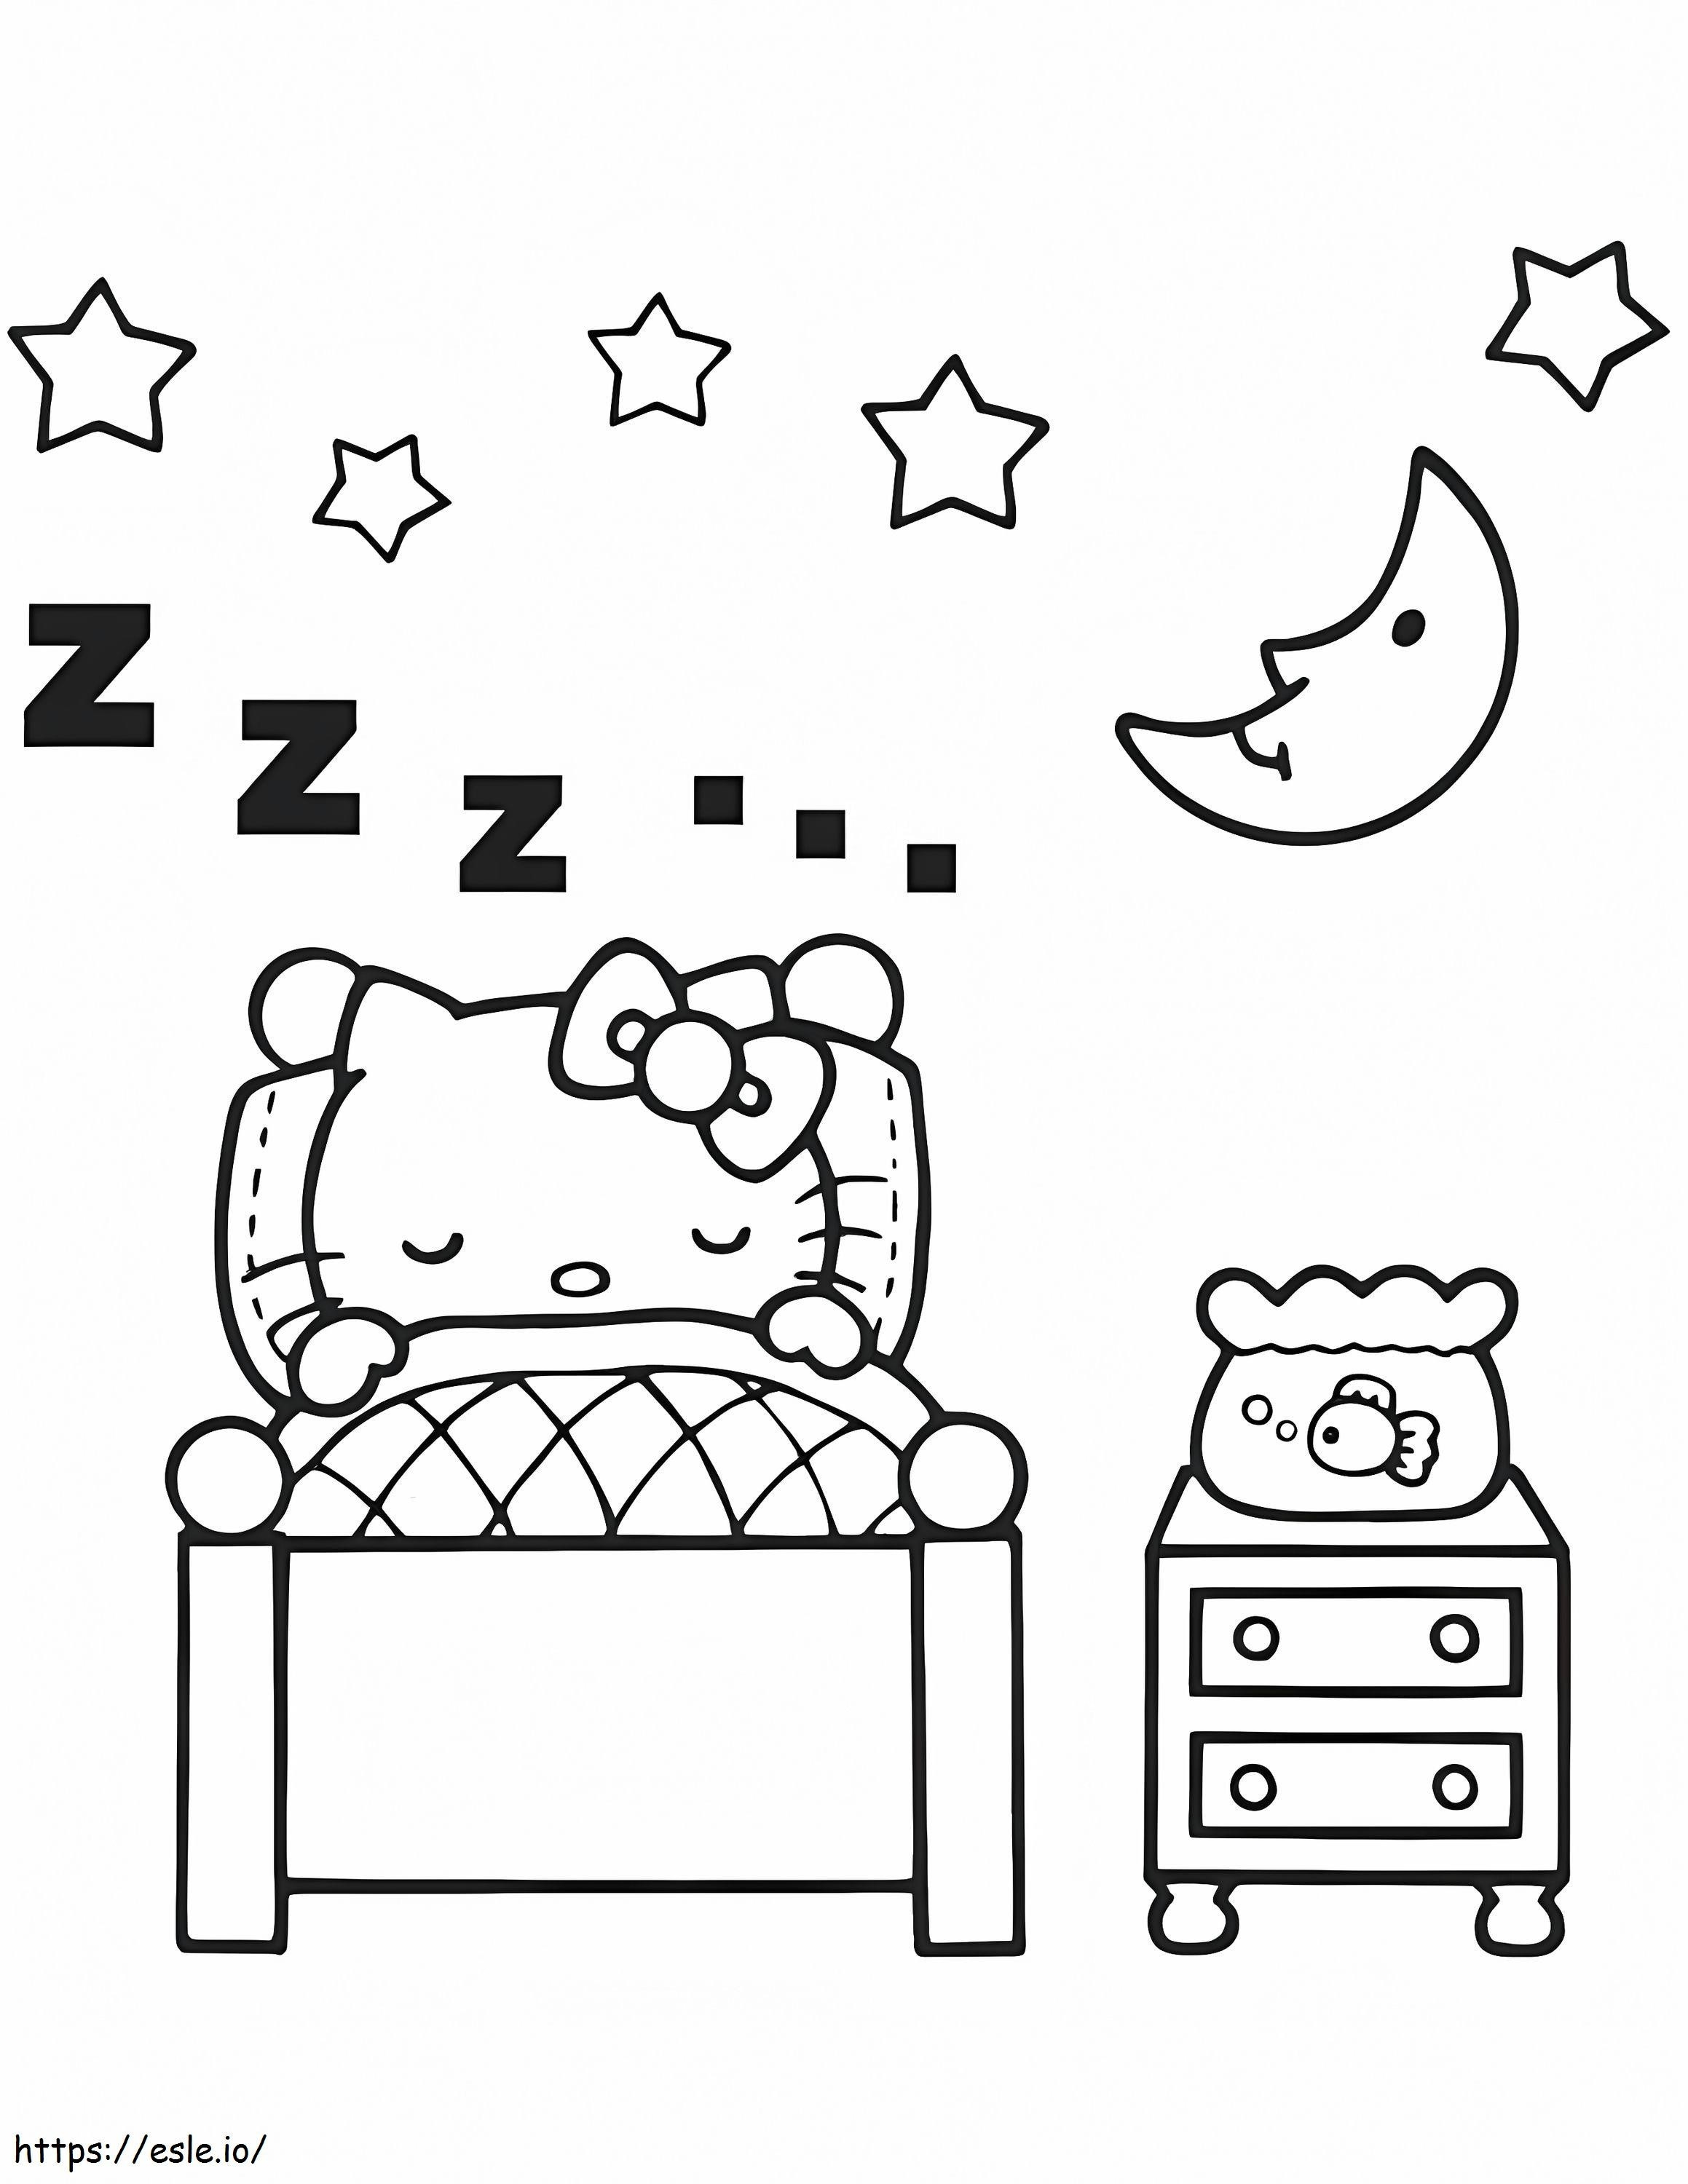 Hello Kitty Sleeping In The Bedroom coloring page